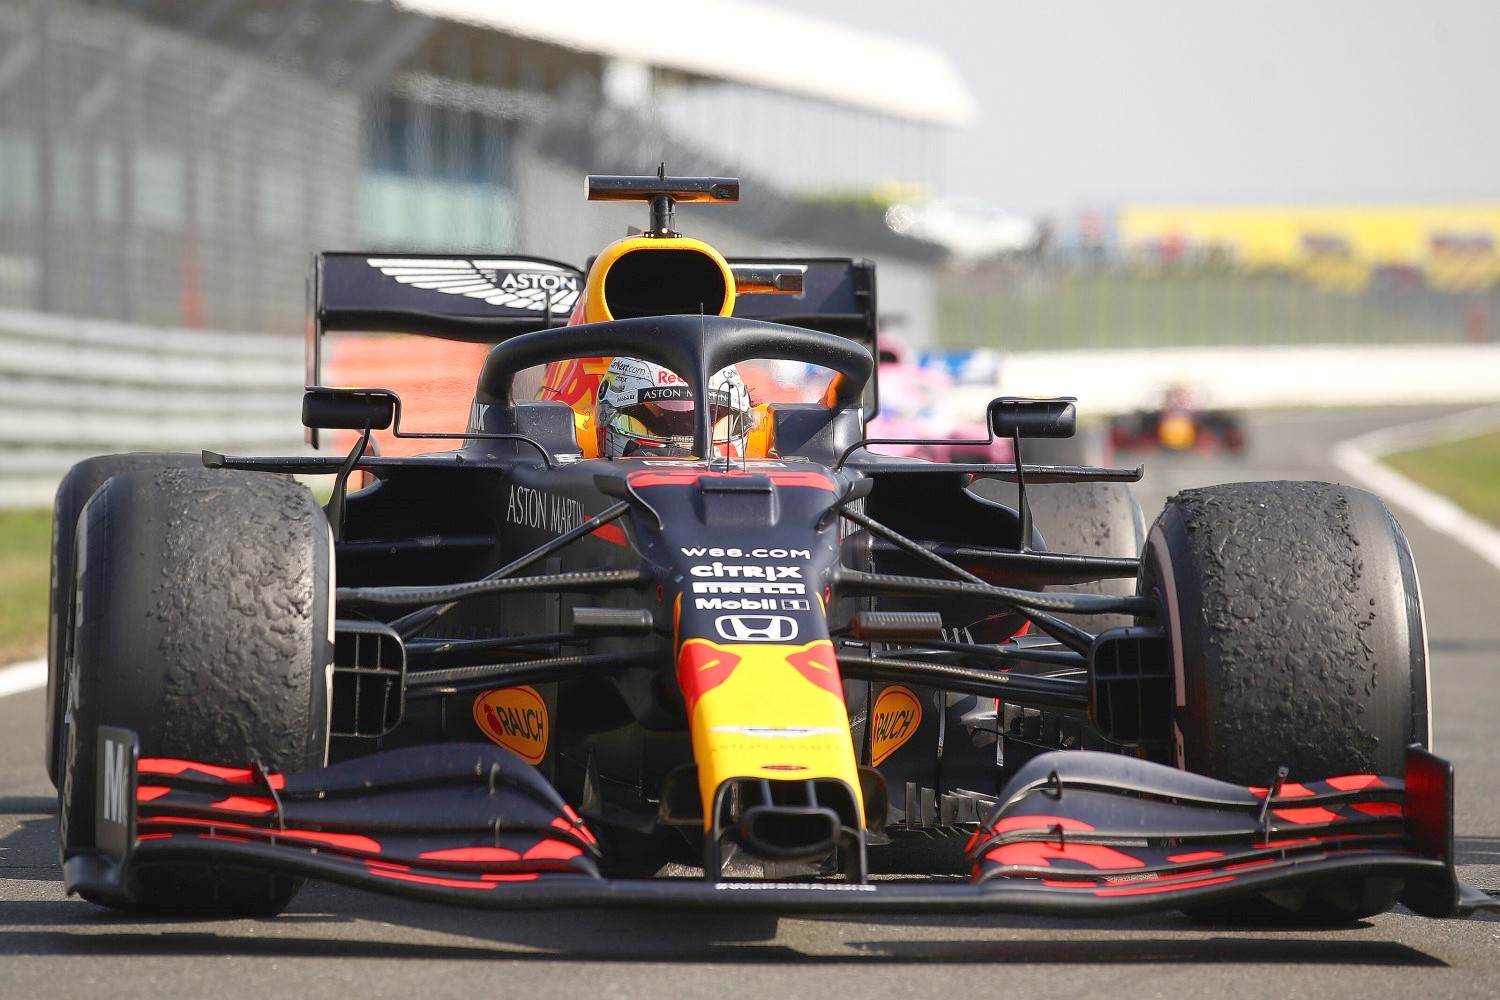 Verstappen's pass of Bottas for the lead was the first on-track pass for the lead in F1 this year. Like floats in a parade, F1 is follow-the-leader